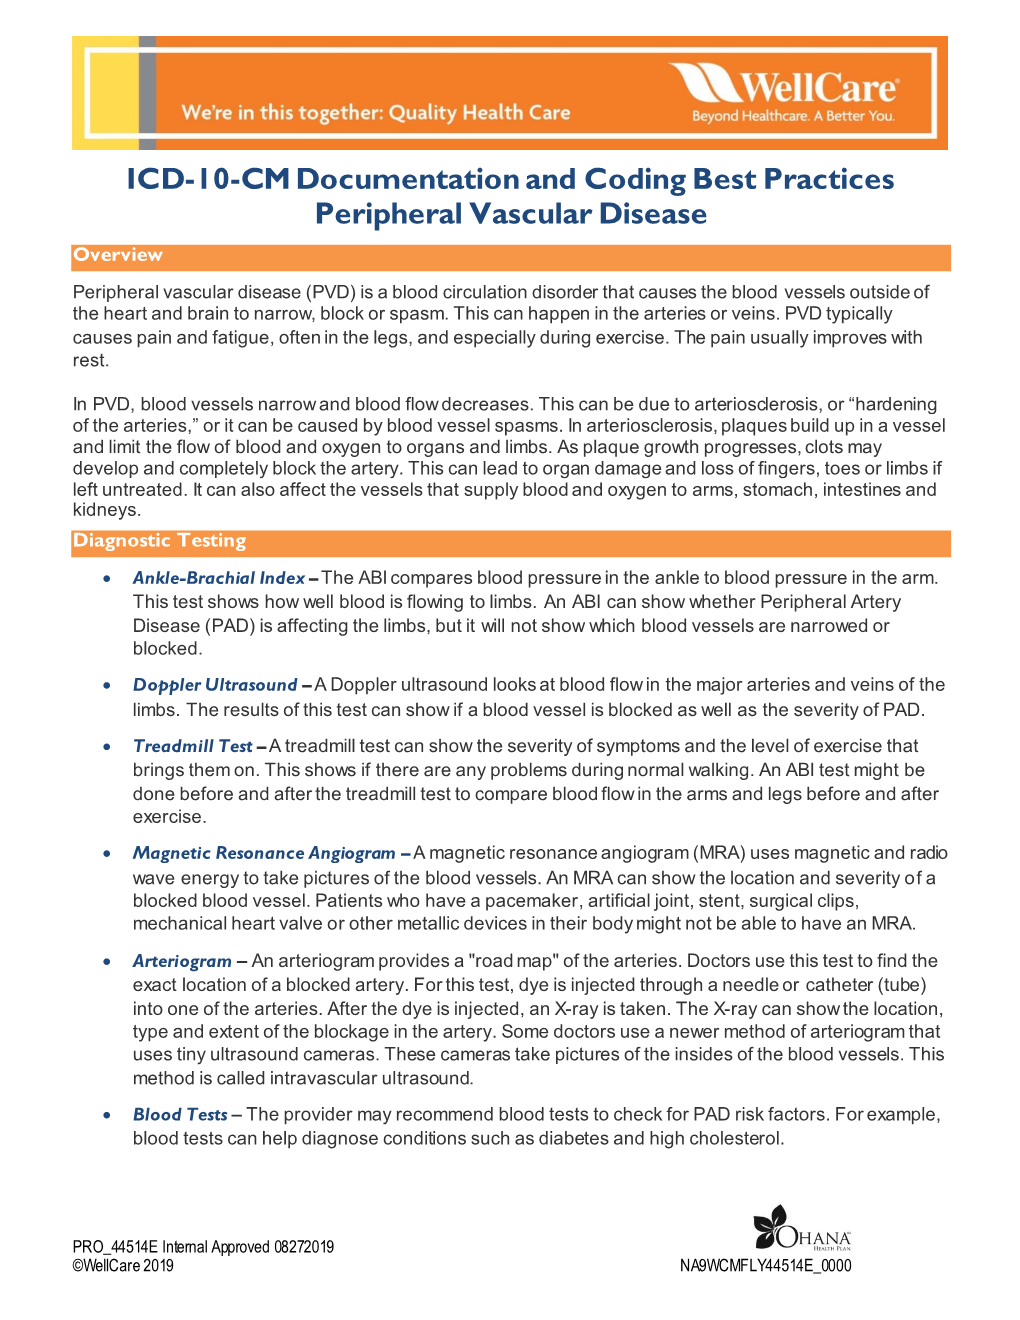 ICD-10-CM Documentation and Coding Best Practices Peripheral